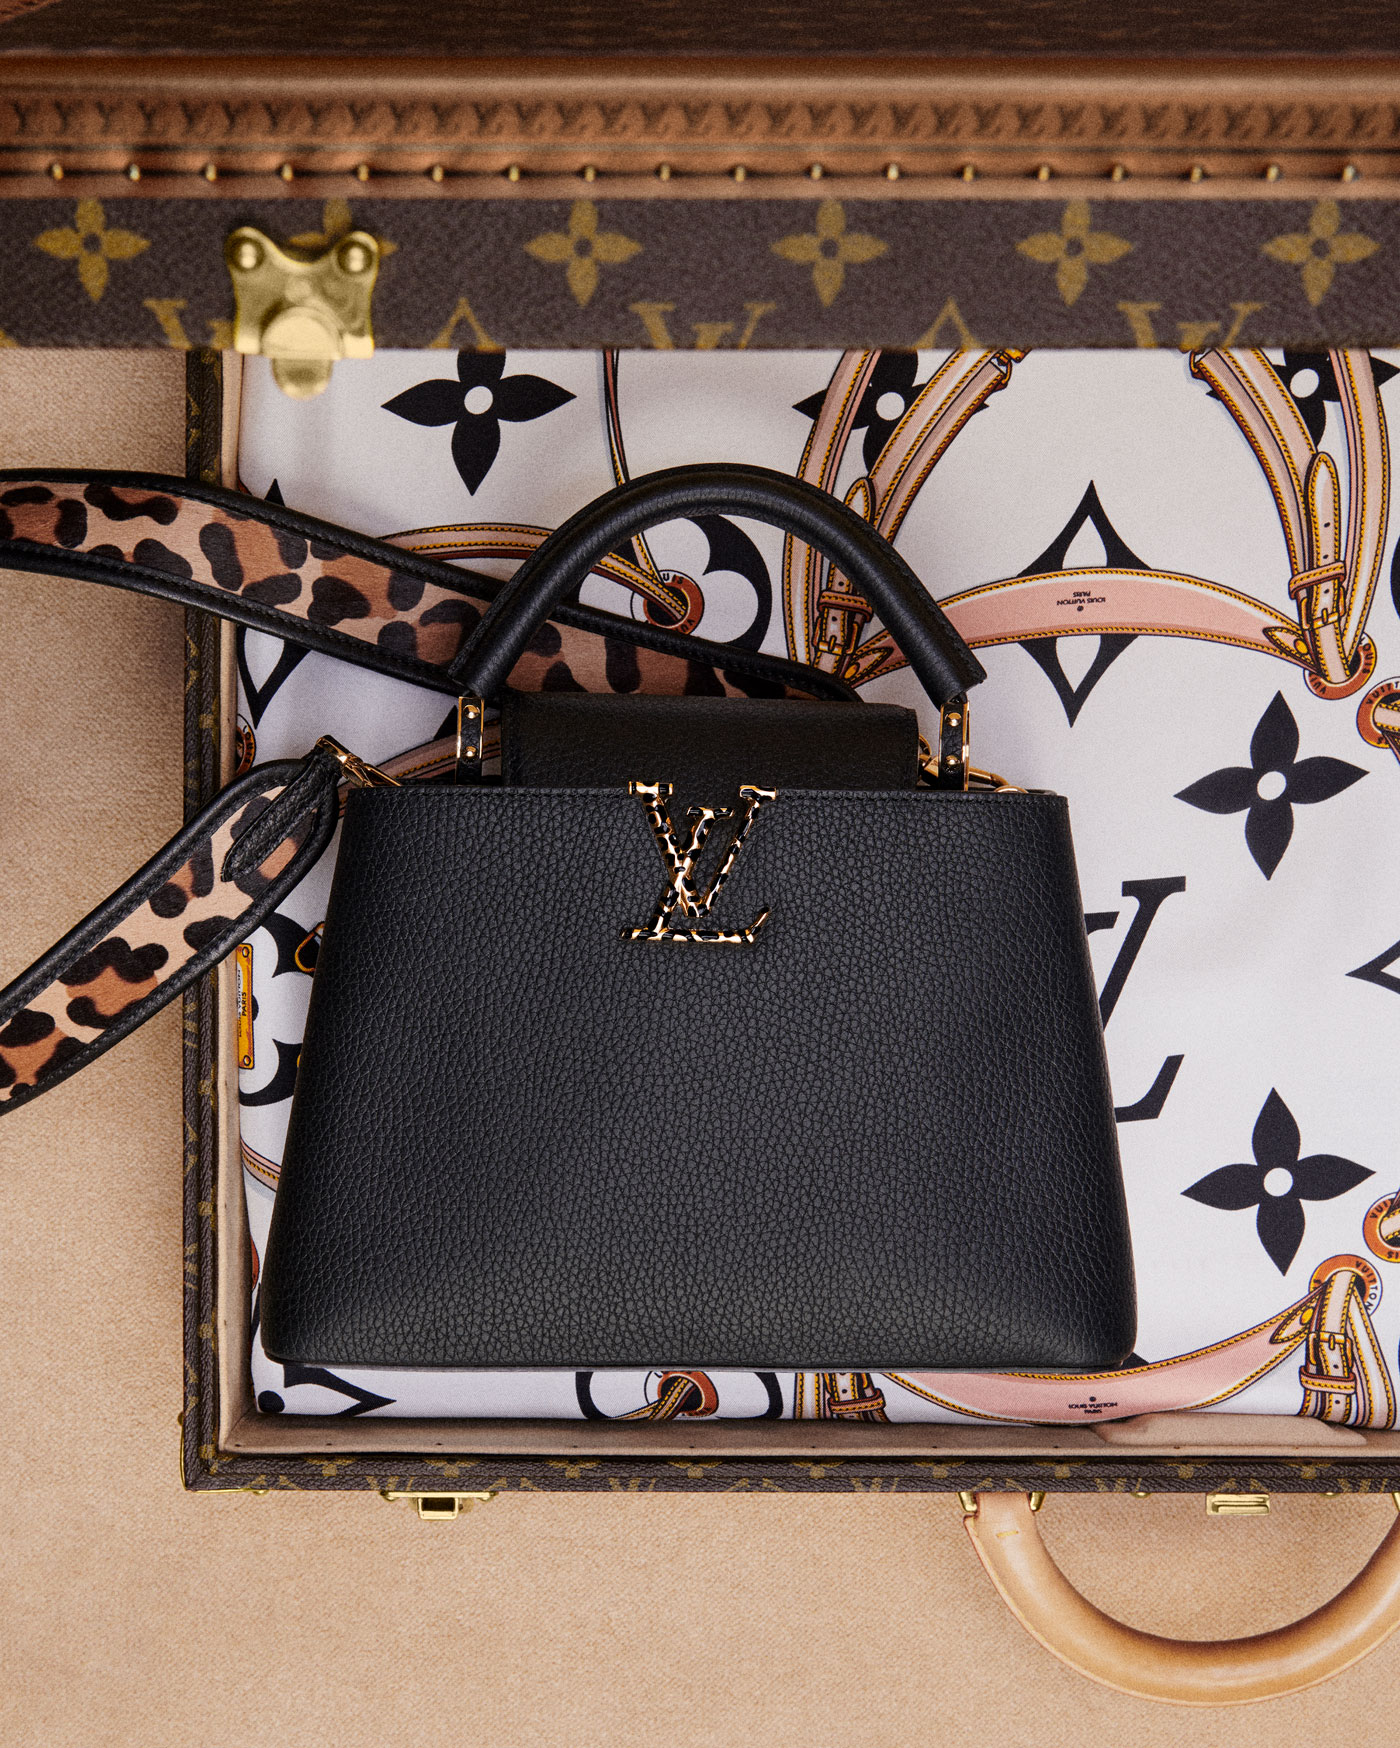 Louis Vuitton's Holiday 2020 Collection Starring Vivienne